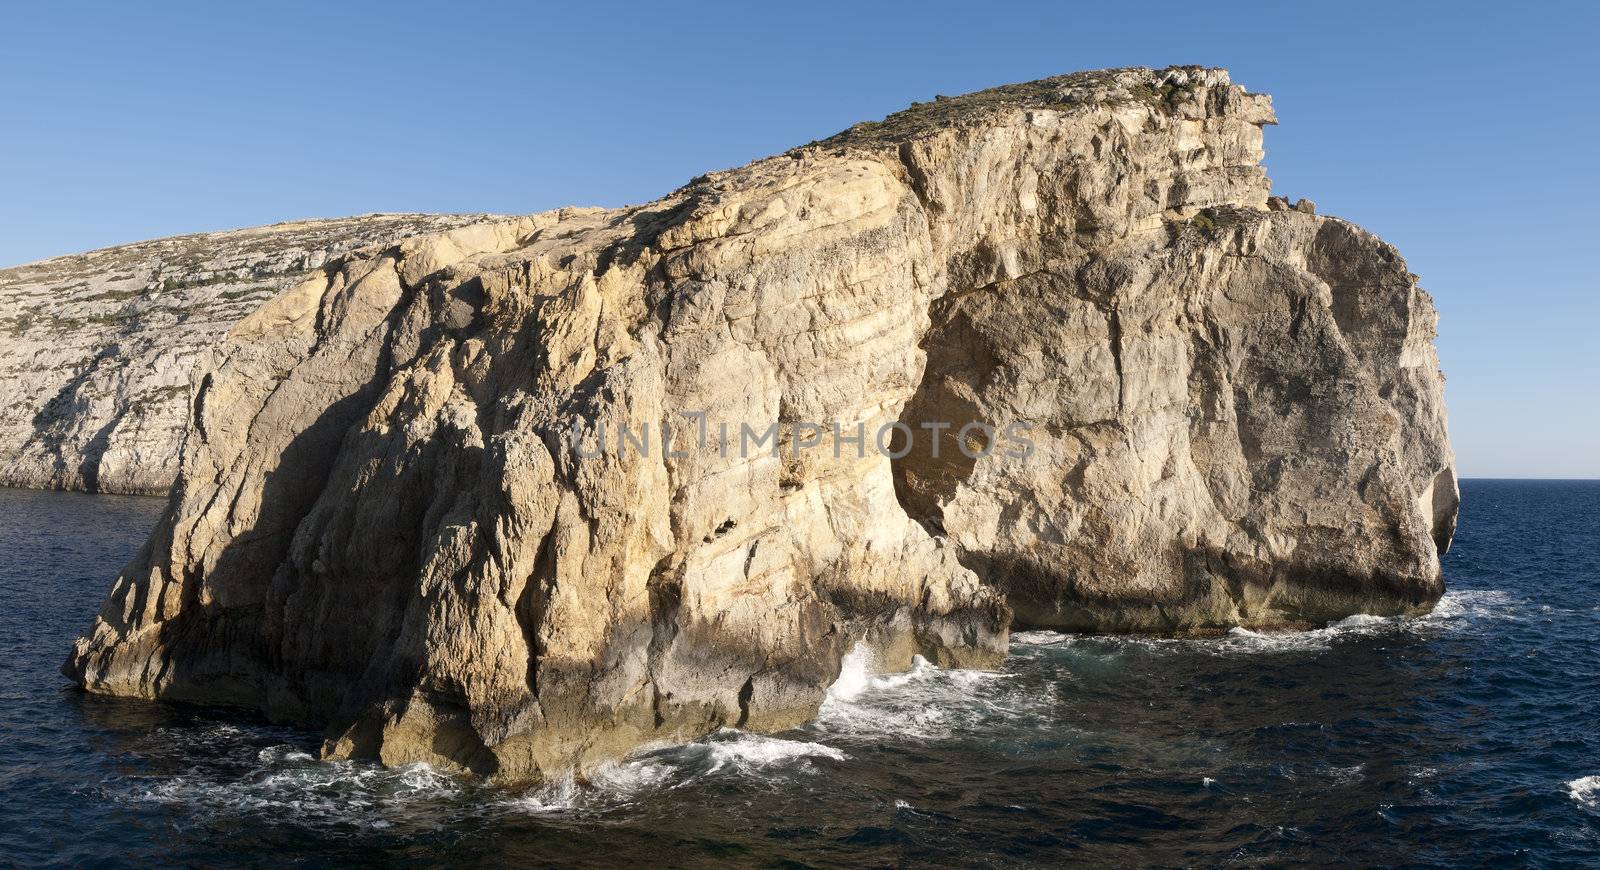 Fungus Rock at Dwejra in Gozo is home to an endemic fungus like plant said to have medicinal qualities